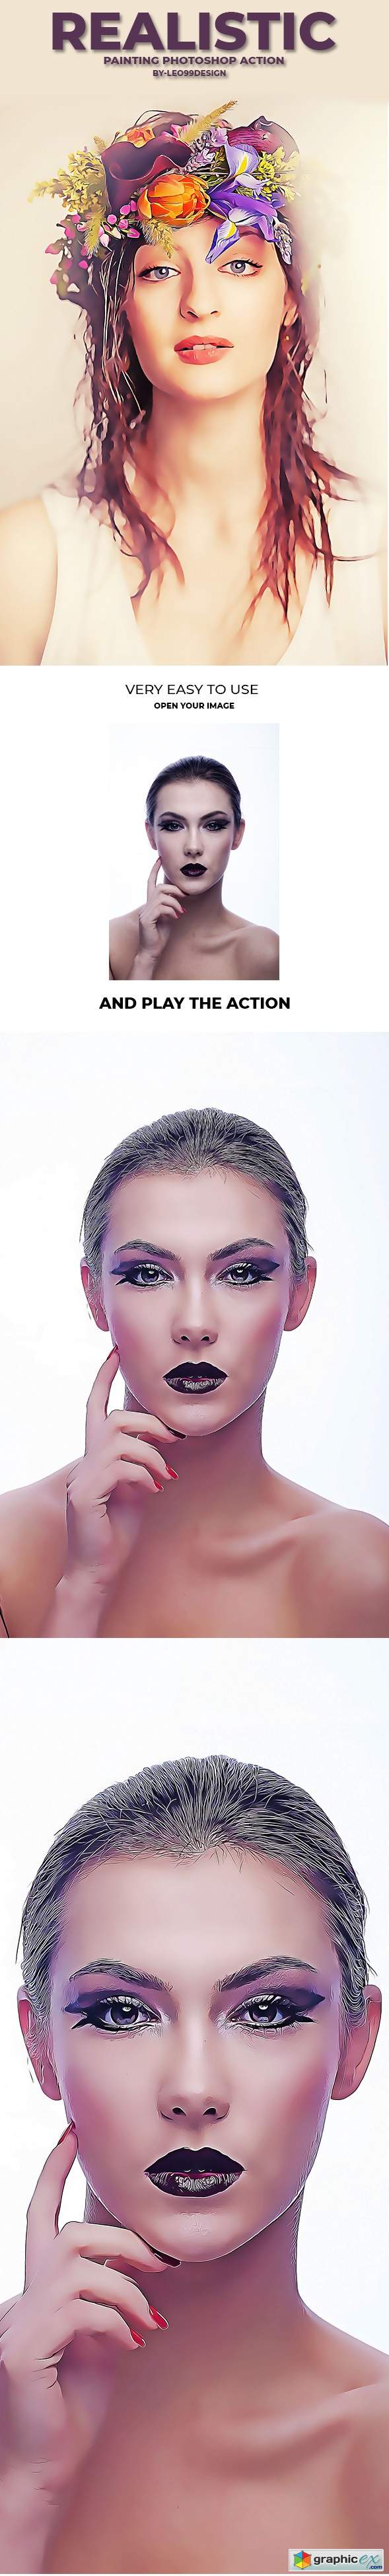 Realistic Painting Photoshop Action 22049785